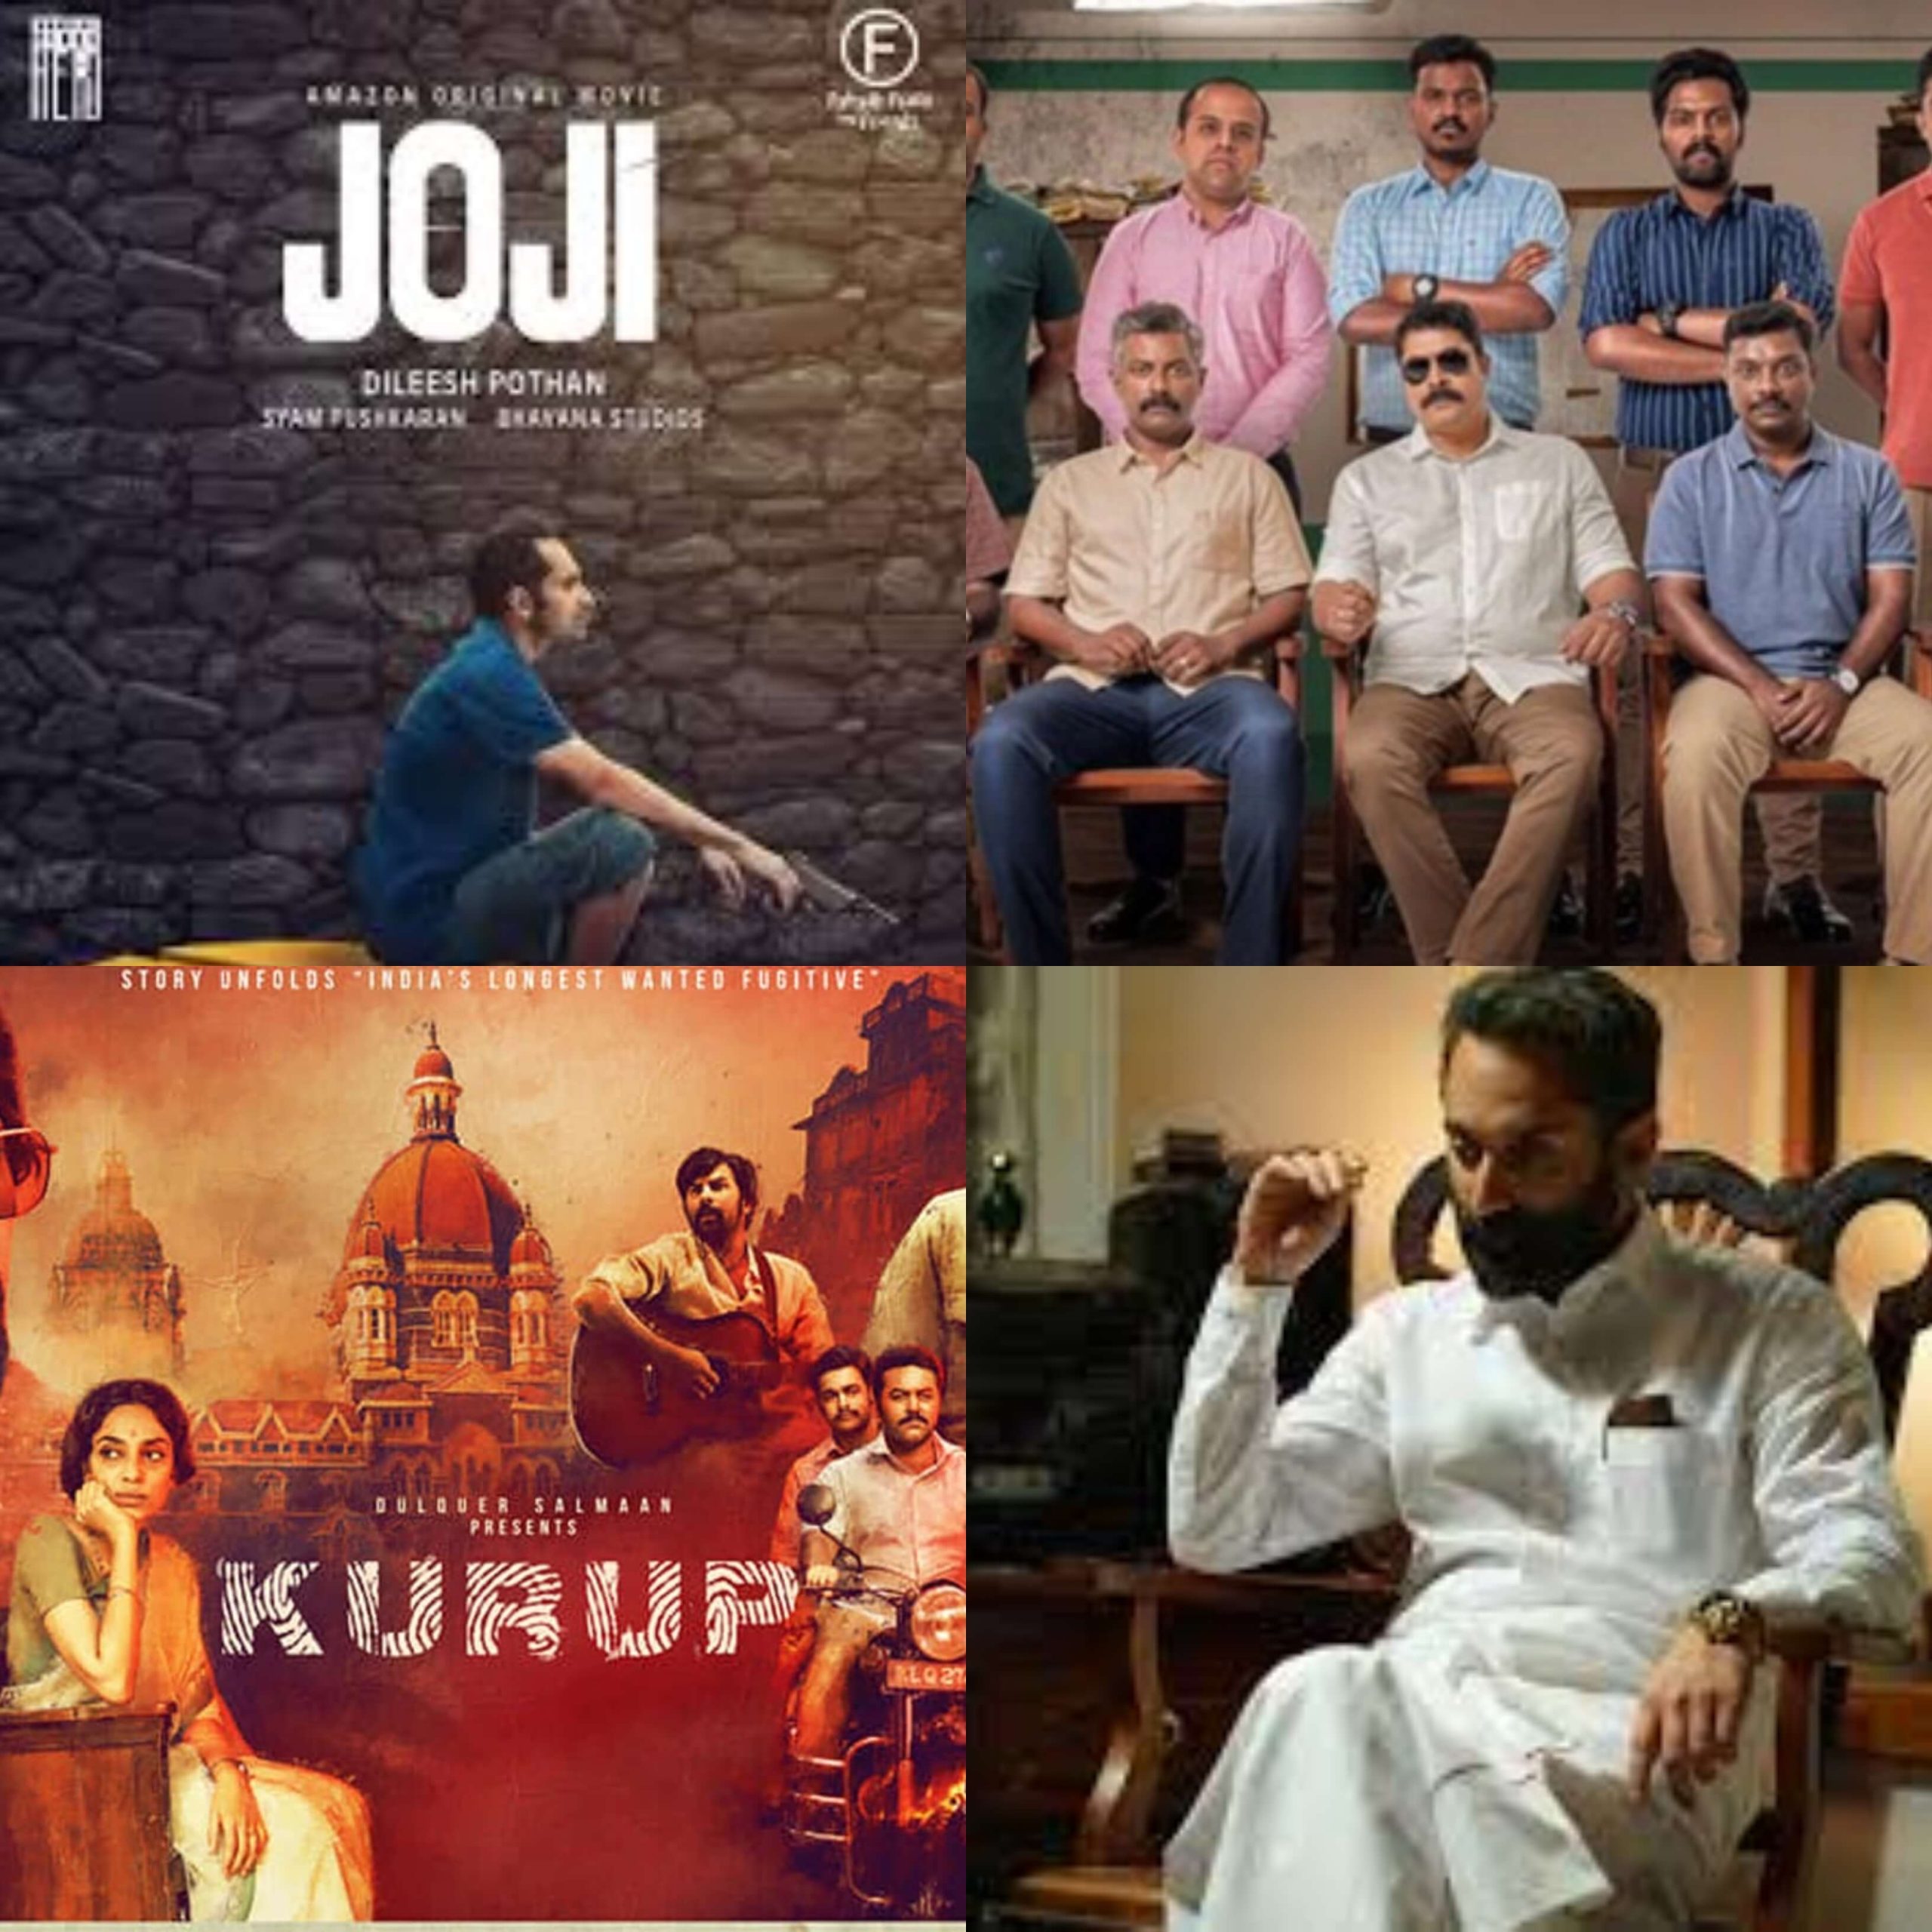 From Operation Java to Kurup, have a look at top 5 Malayalam films that you must watch on New Year's eve